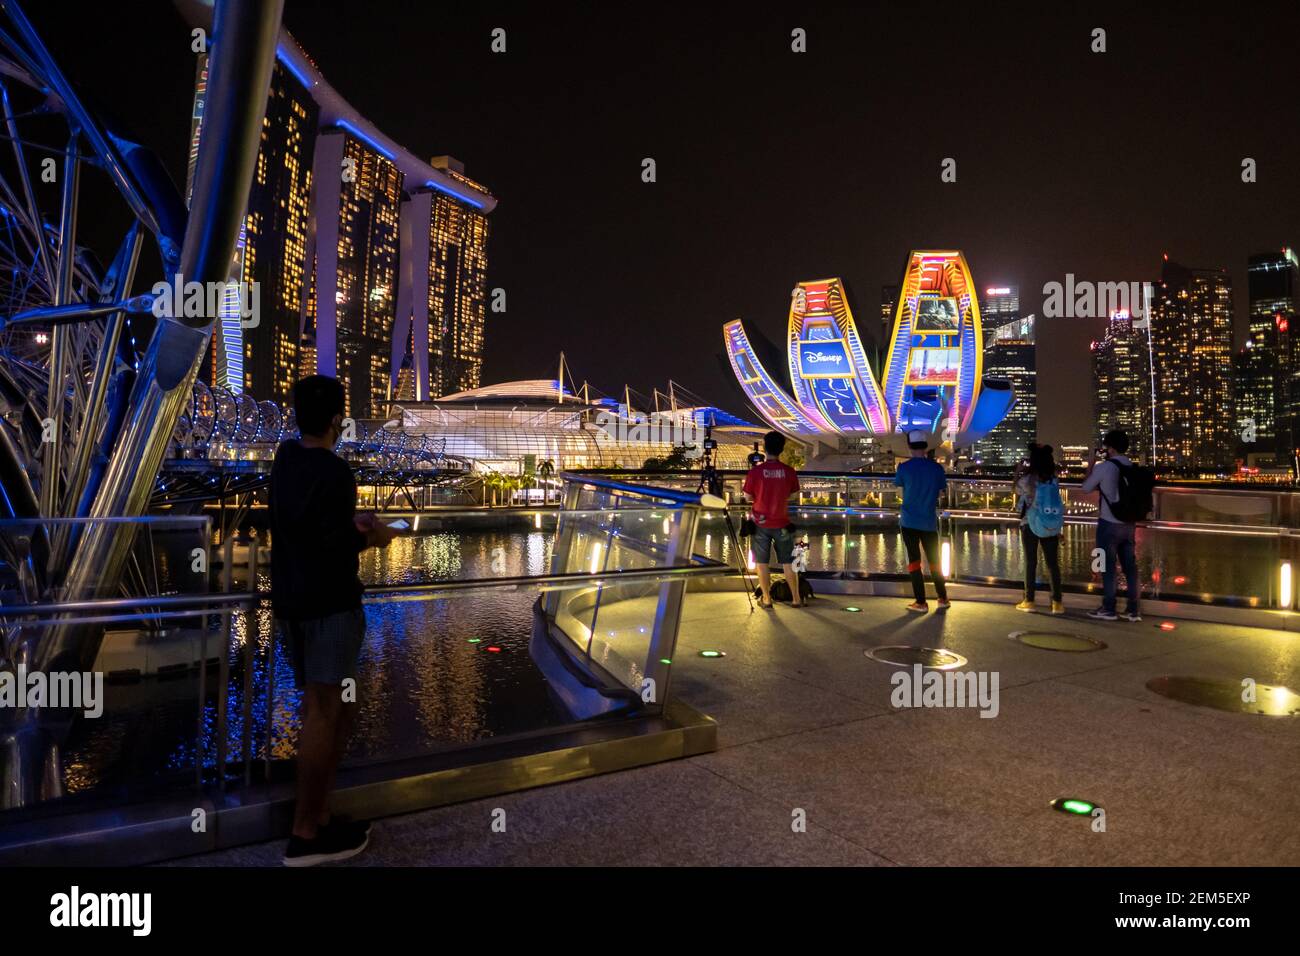 People Are Seen Watching Disney Showcase That Was Projected At The Singapore Art Science Museum And The Marina Bay Sands Singapore Disney Was Launched In Singapore On The 24th February 21 Making The Country The First In The World To Receive